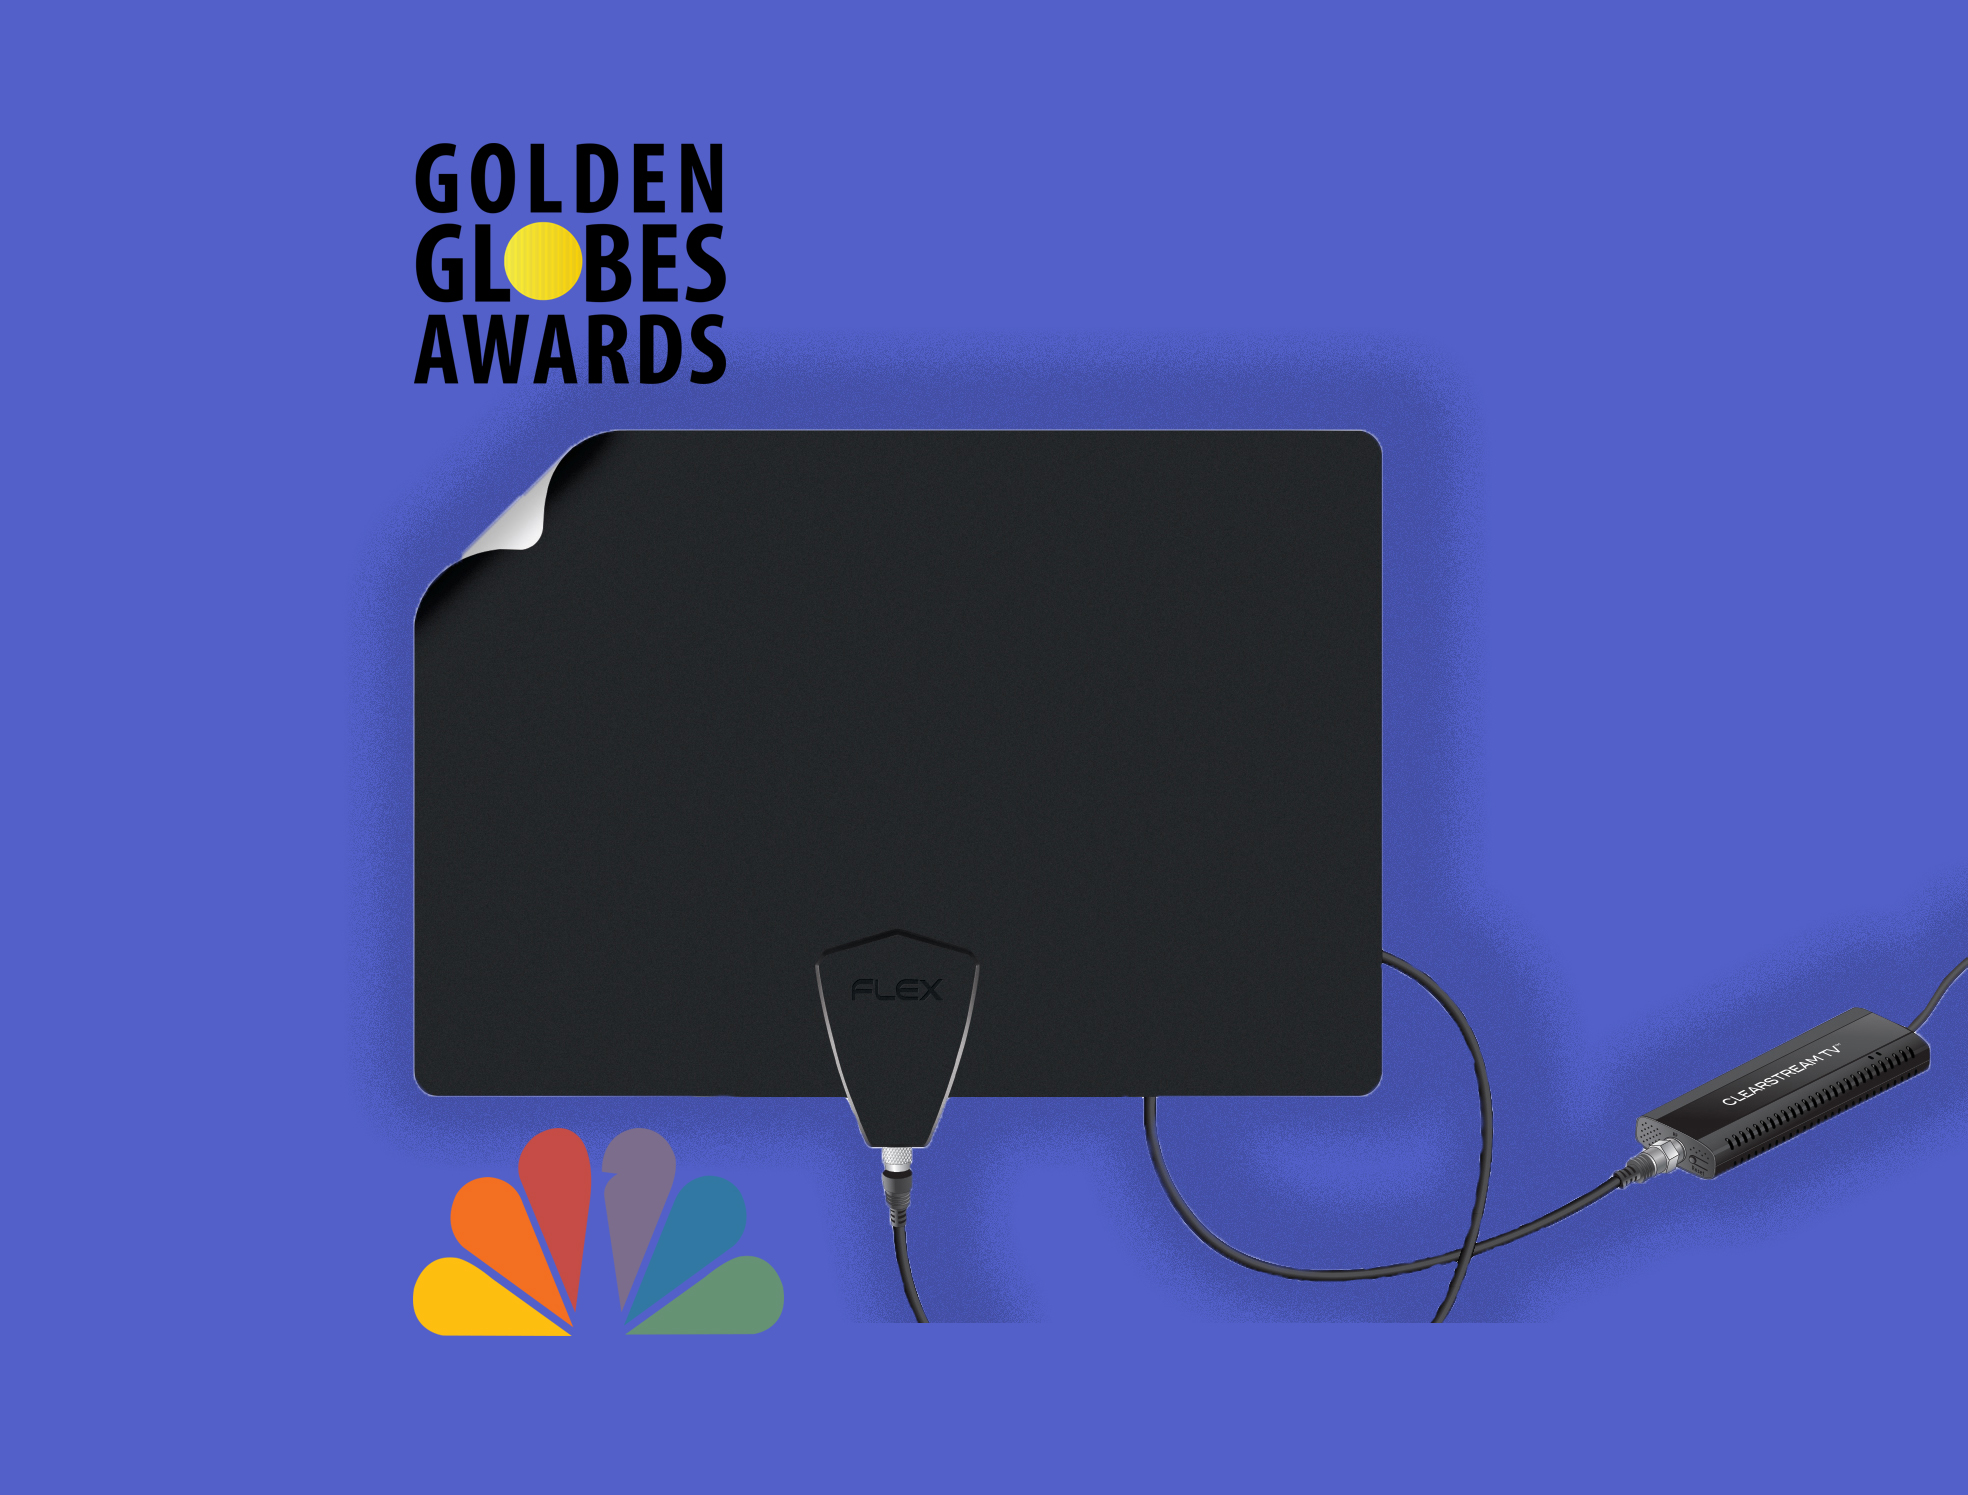 Results image of ClearStream FLEX with Golden Globe and NBC logo